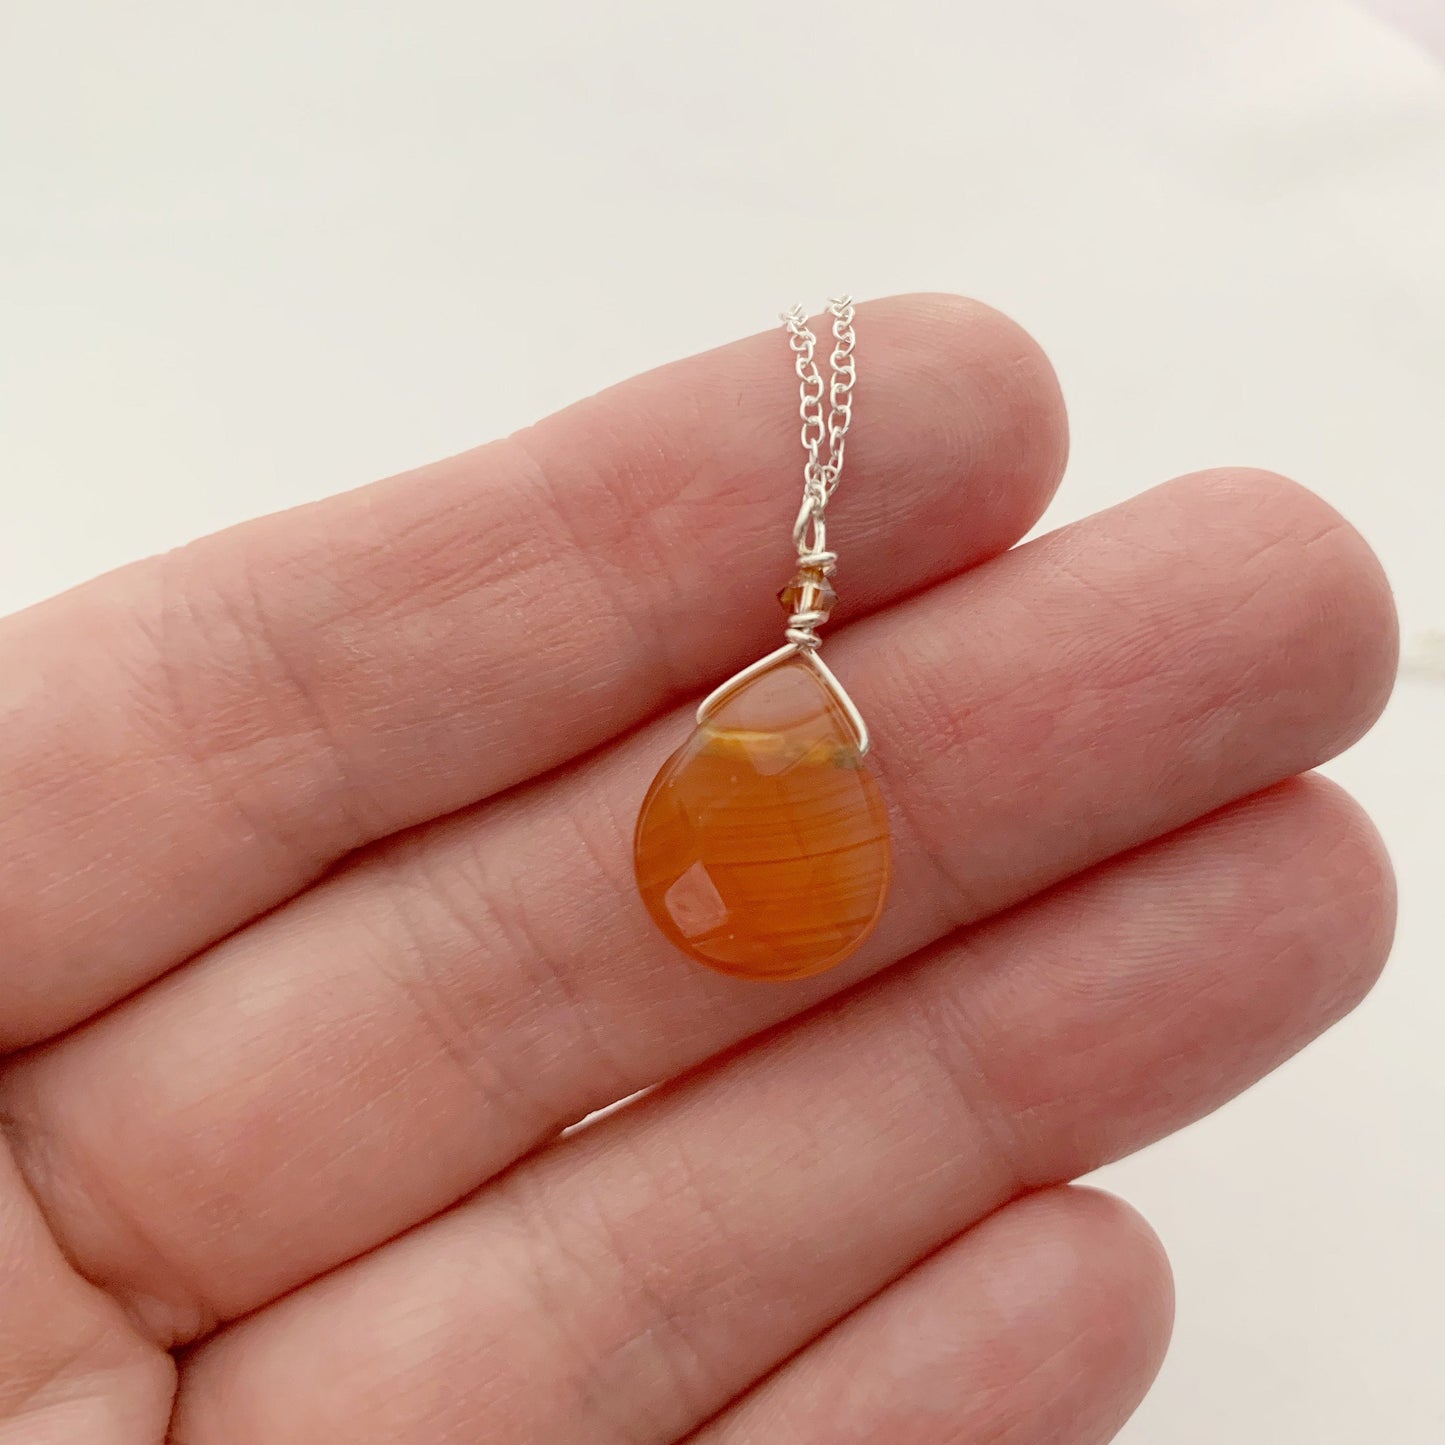 I AM Strong I AM Fearless I AM Brave / Carnelian/ Simple Reminder Necklaces / Sterling Silver / Intention Necklaces